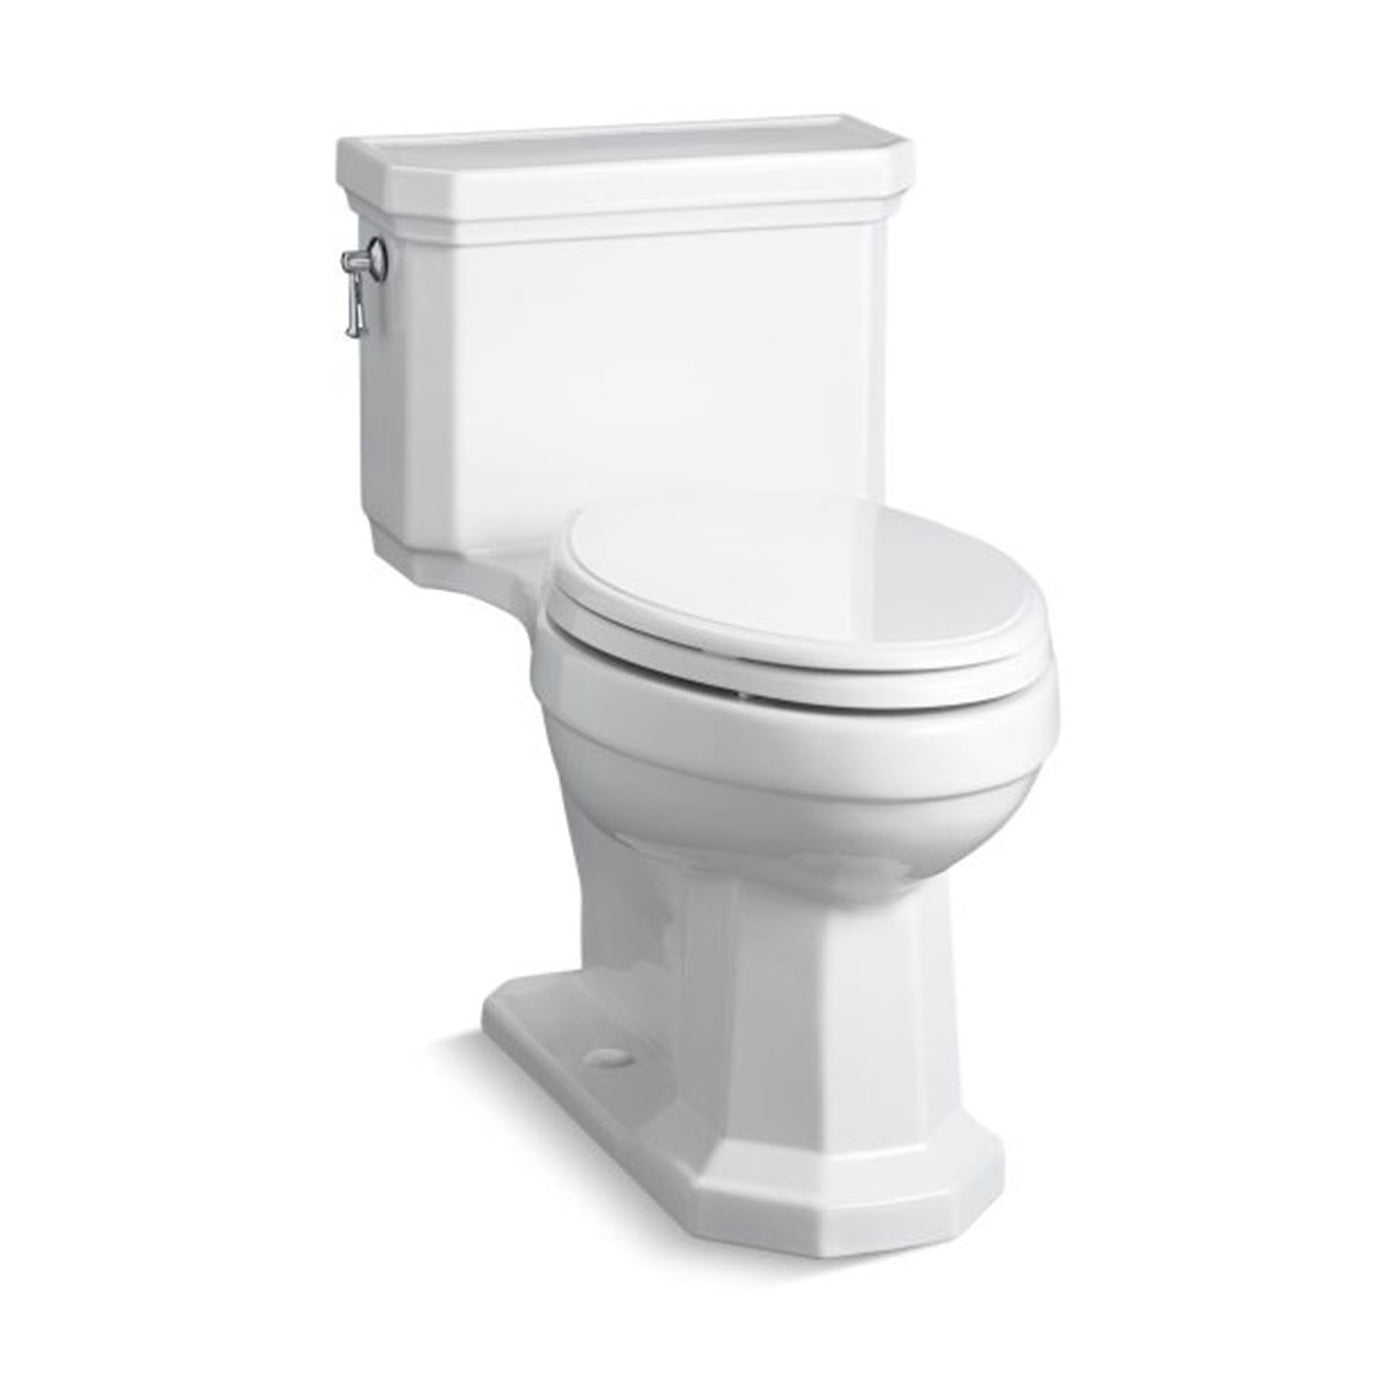 Kathryn® One-piece compact elongated toilet with concealed trapway, 1.28 gpf